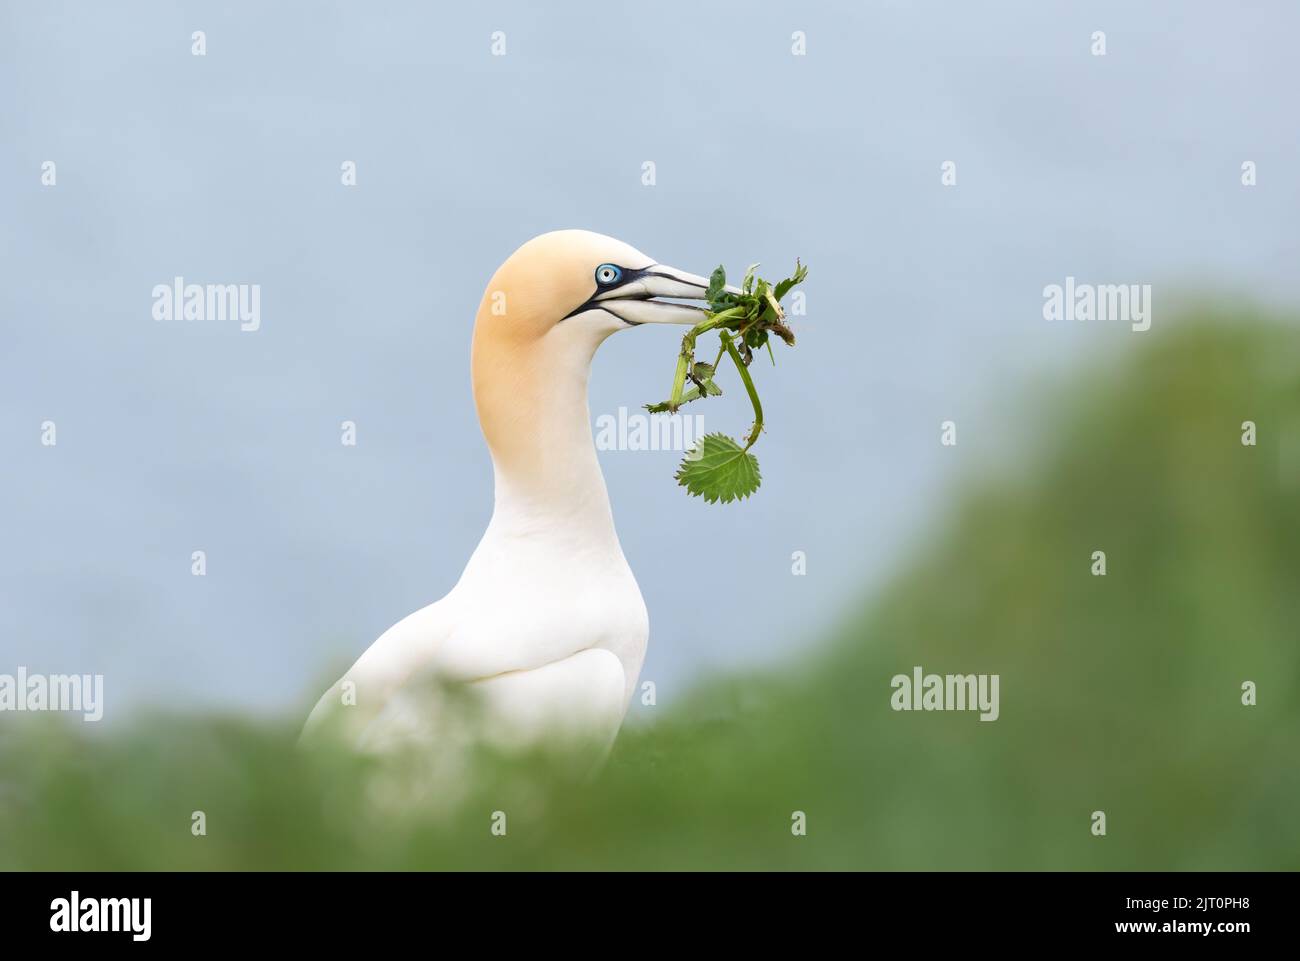 Close up of a Northern gannet (Morus bassana) with nesting material in the beak, Bempton cliffs, UK. Stock Photo